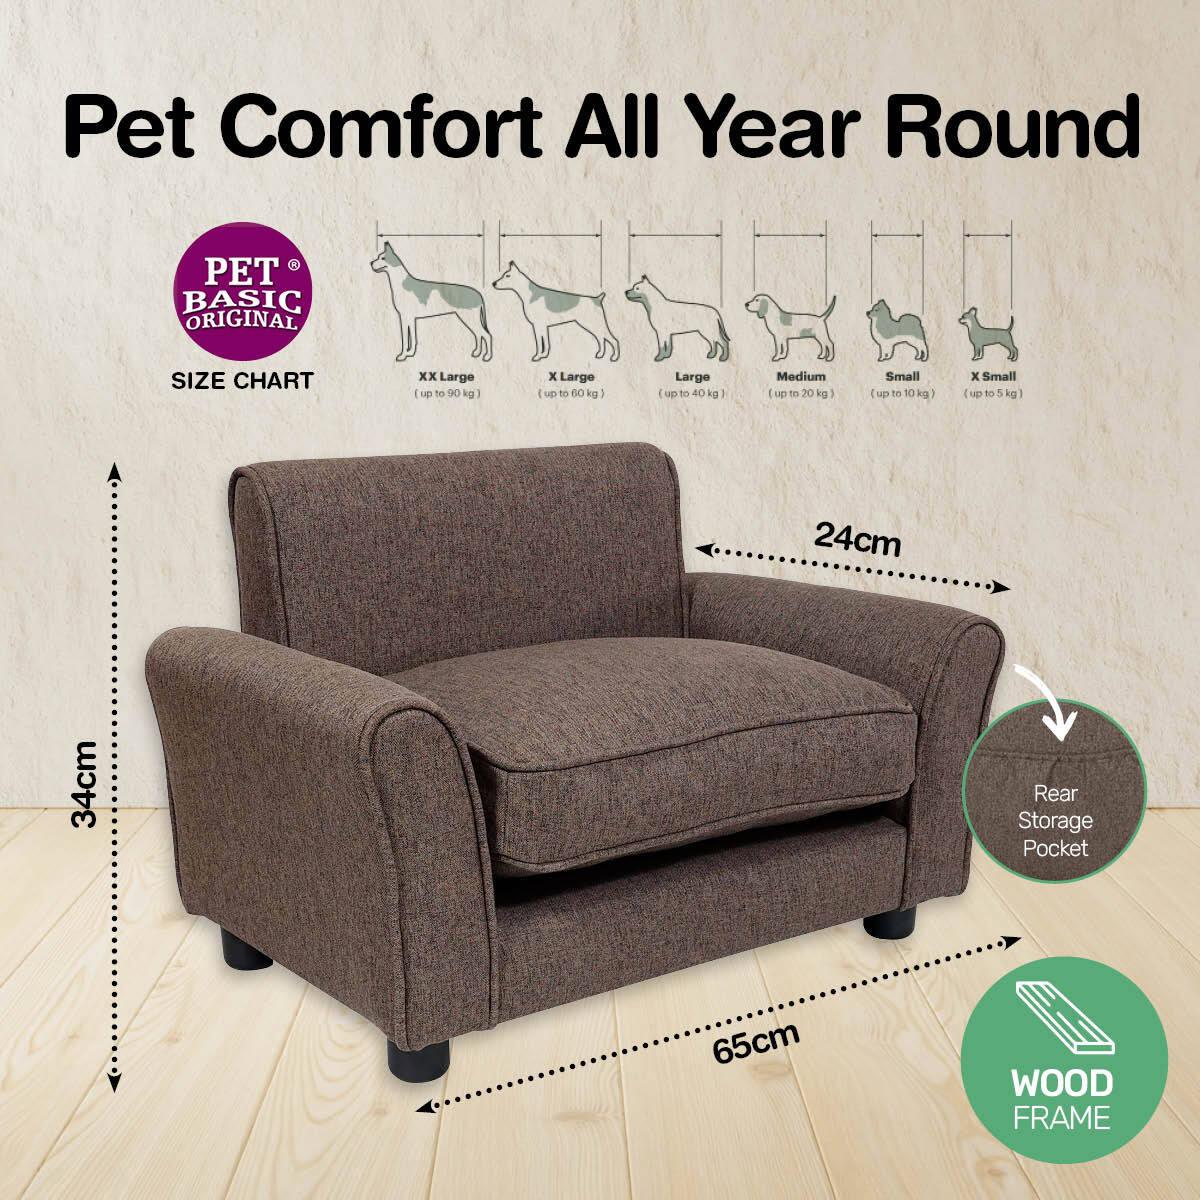 Pet Basic Pet Chair Bed Stylish Luxurious Sturdy Washable Fabric Brown 65cm